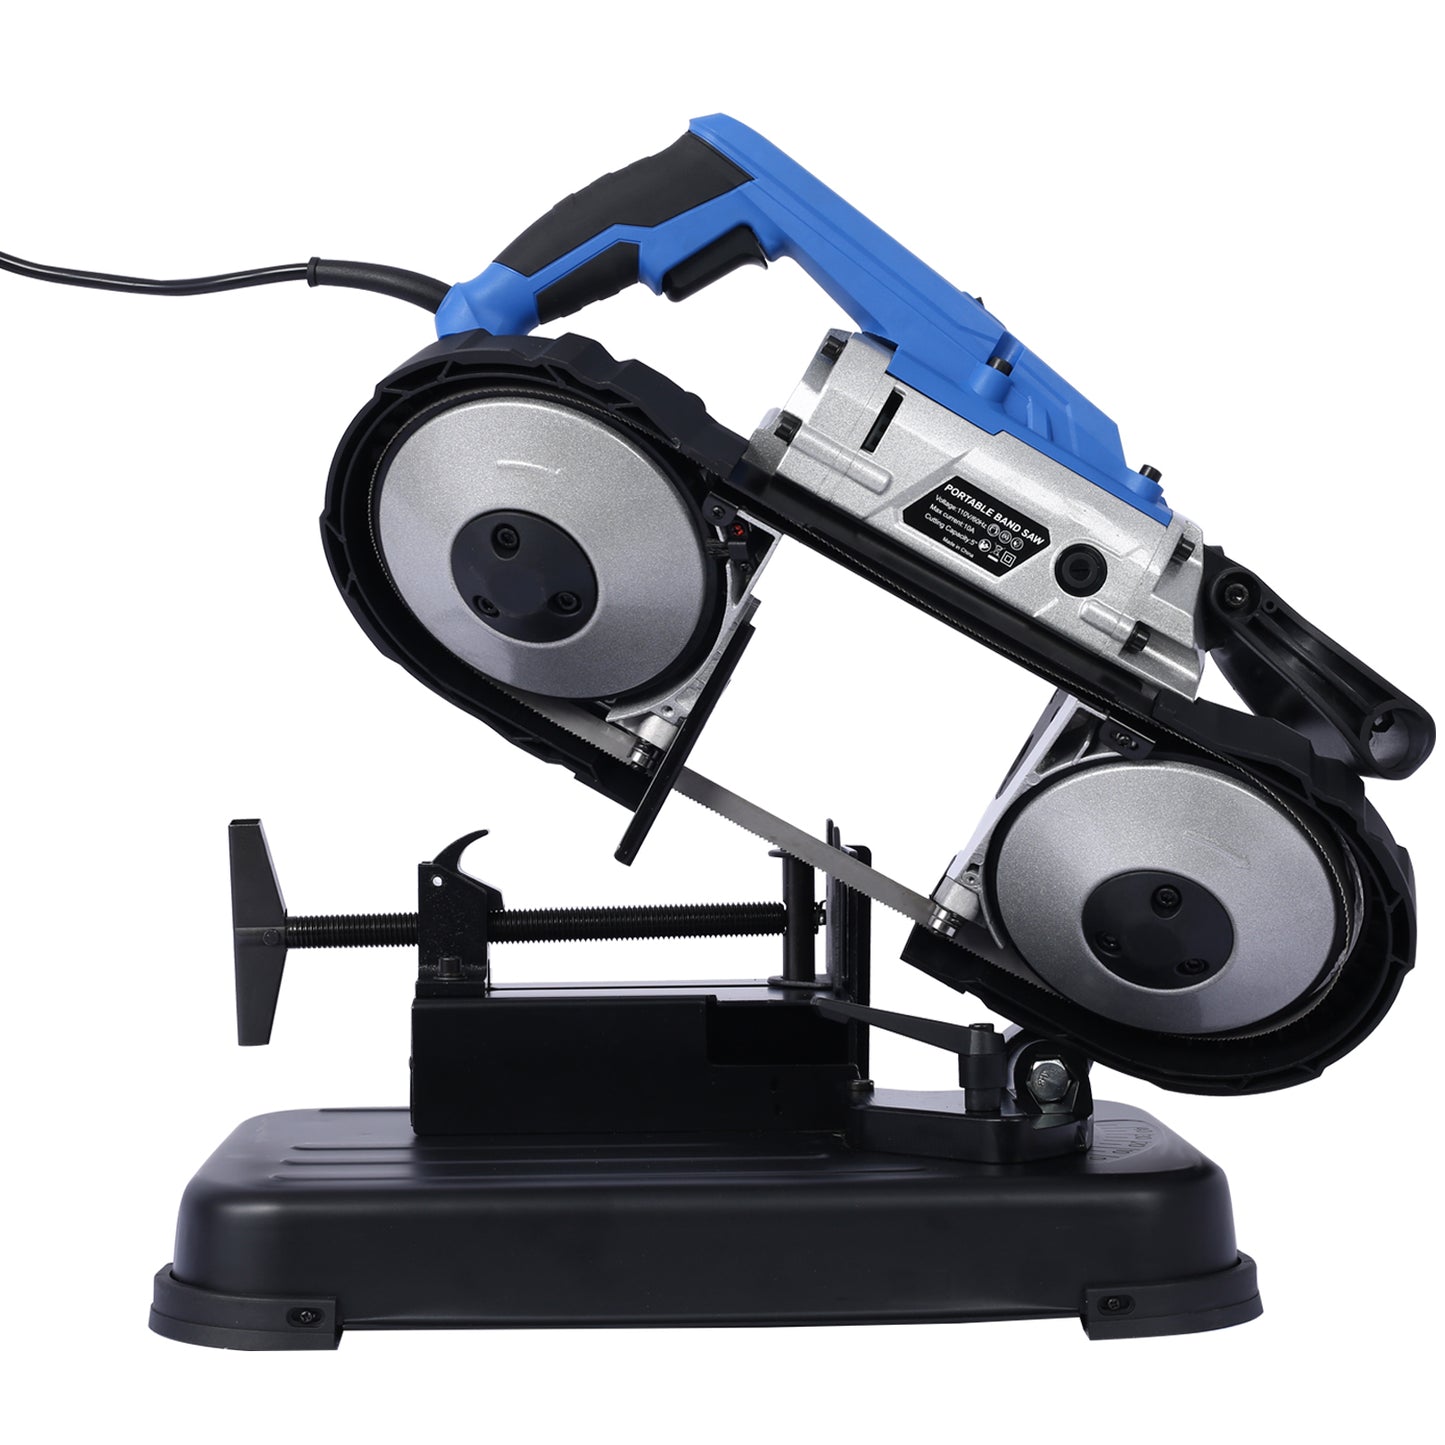 High-Performance Portable Band Saw with Removable Stainless Steel Base, 45°-90° Cutting, 10A 1100W Motor, 5-inch Depth Cut,